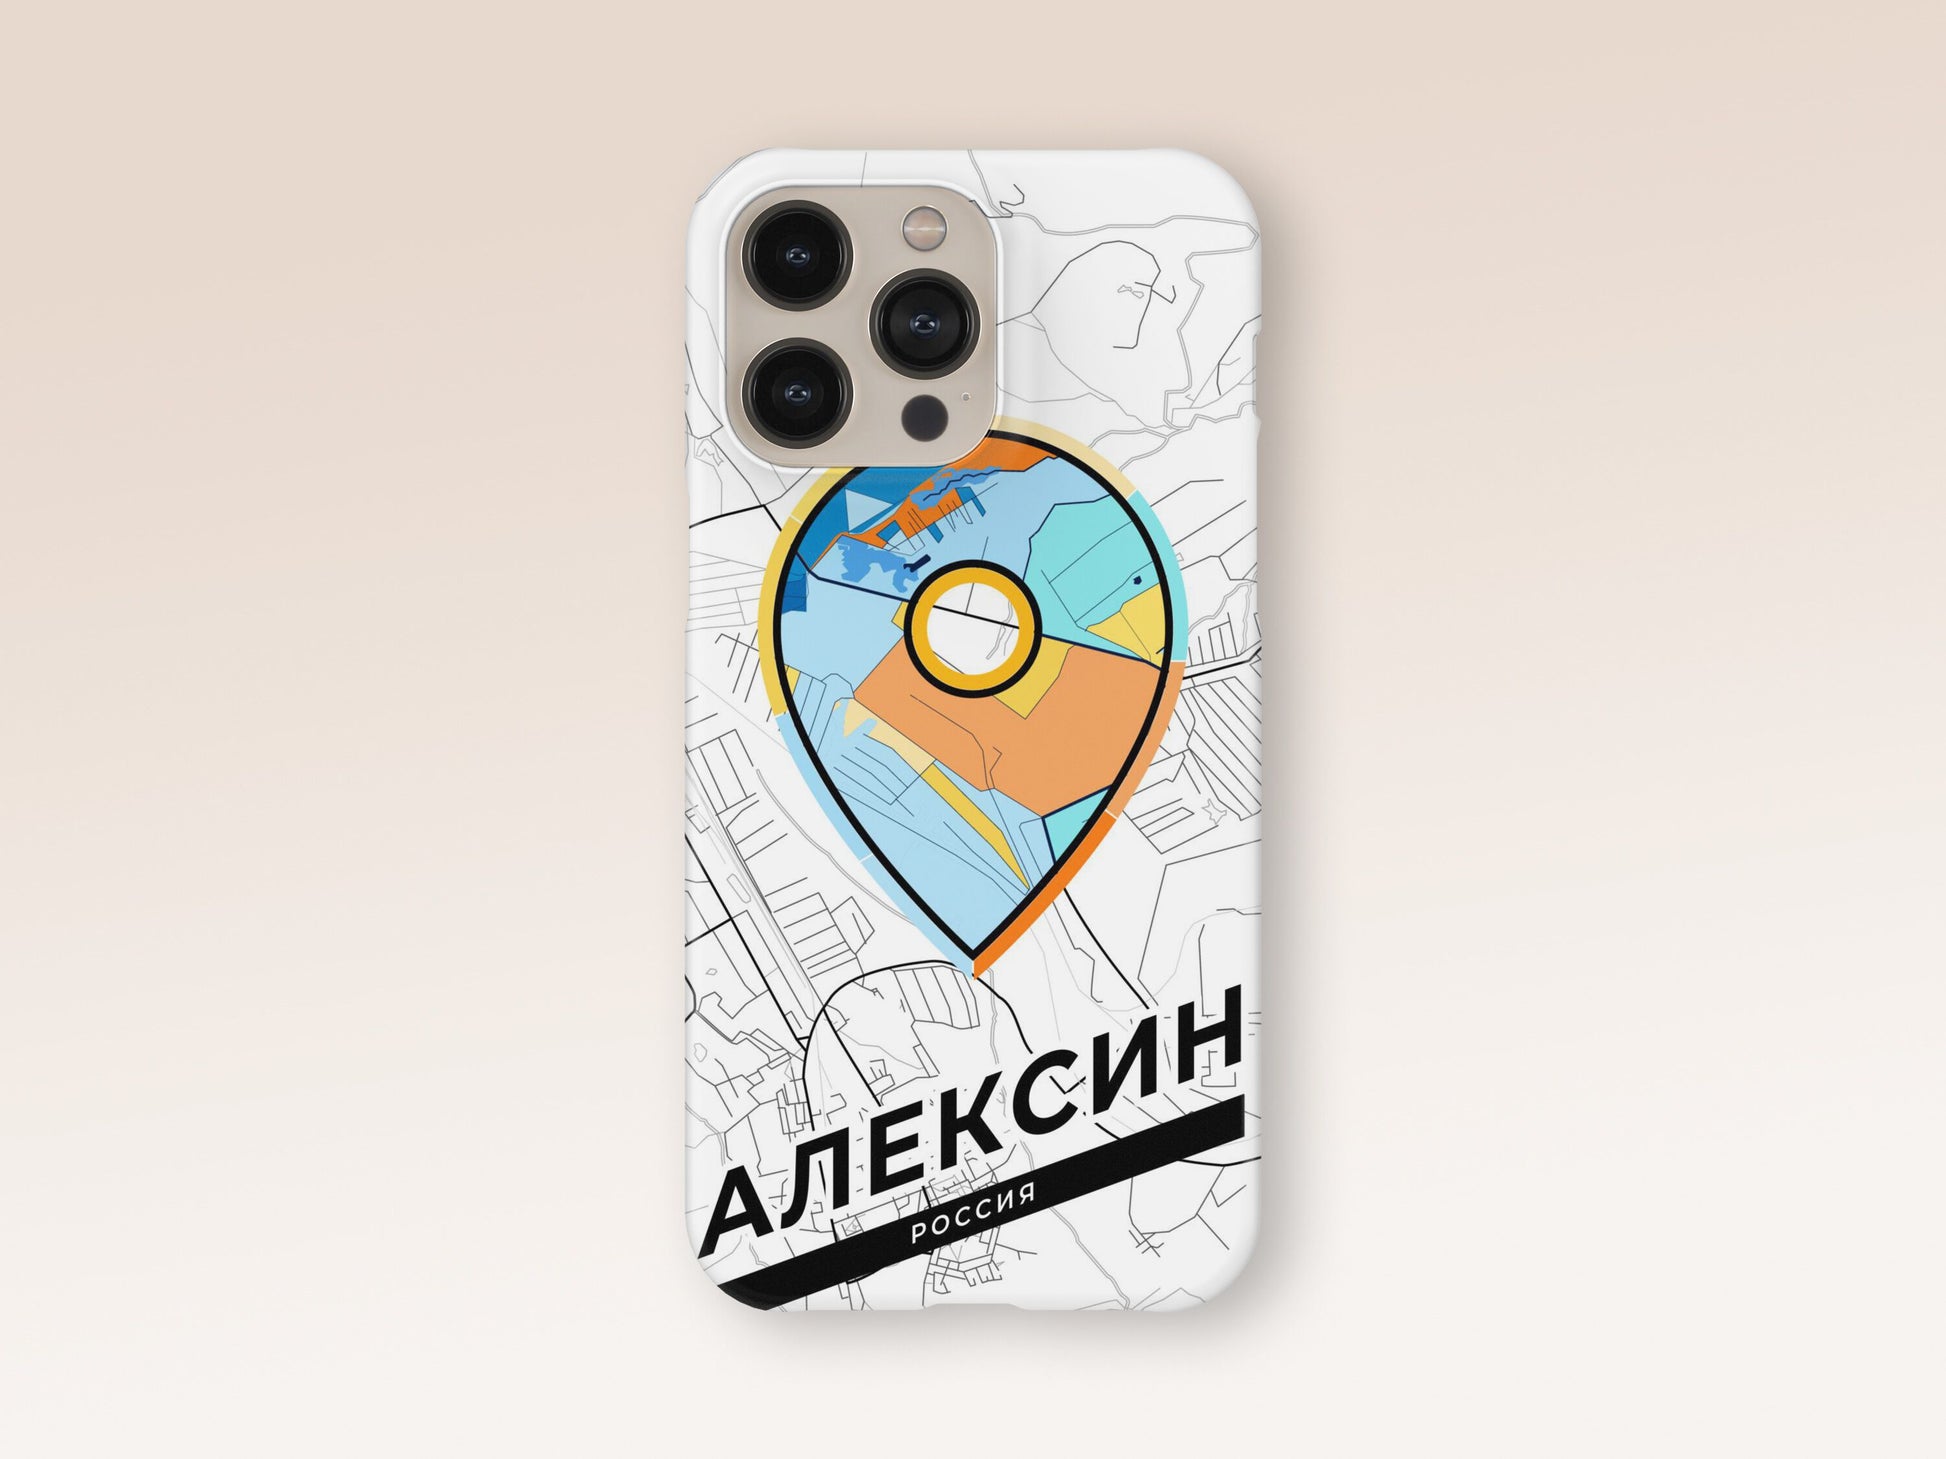 Aleksin Russia slim phone case with colorful icon. Birthday, wedding or housewarming gift. Couple match cases. 1